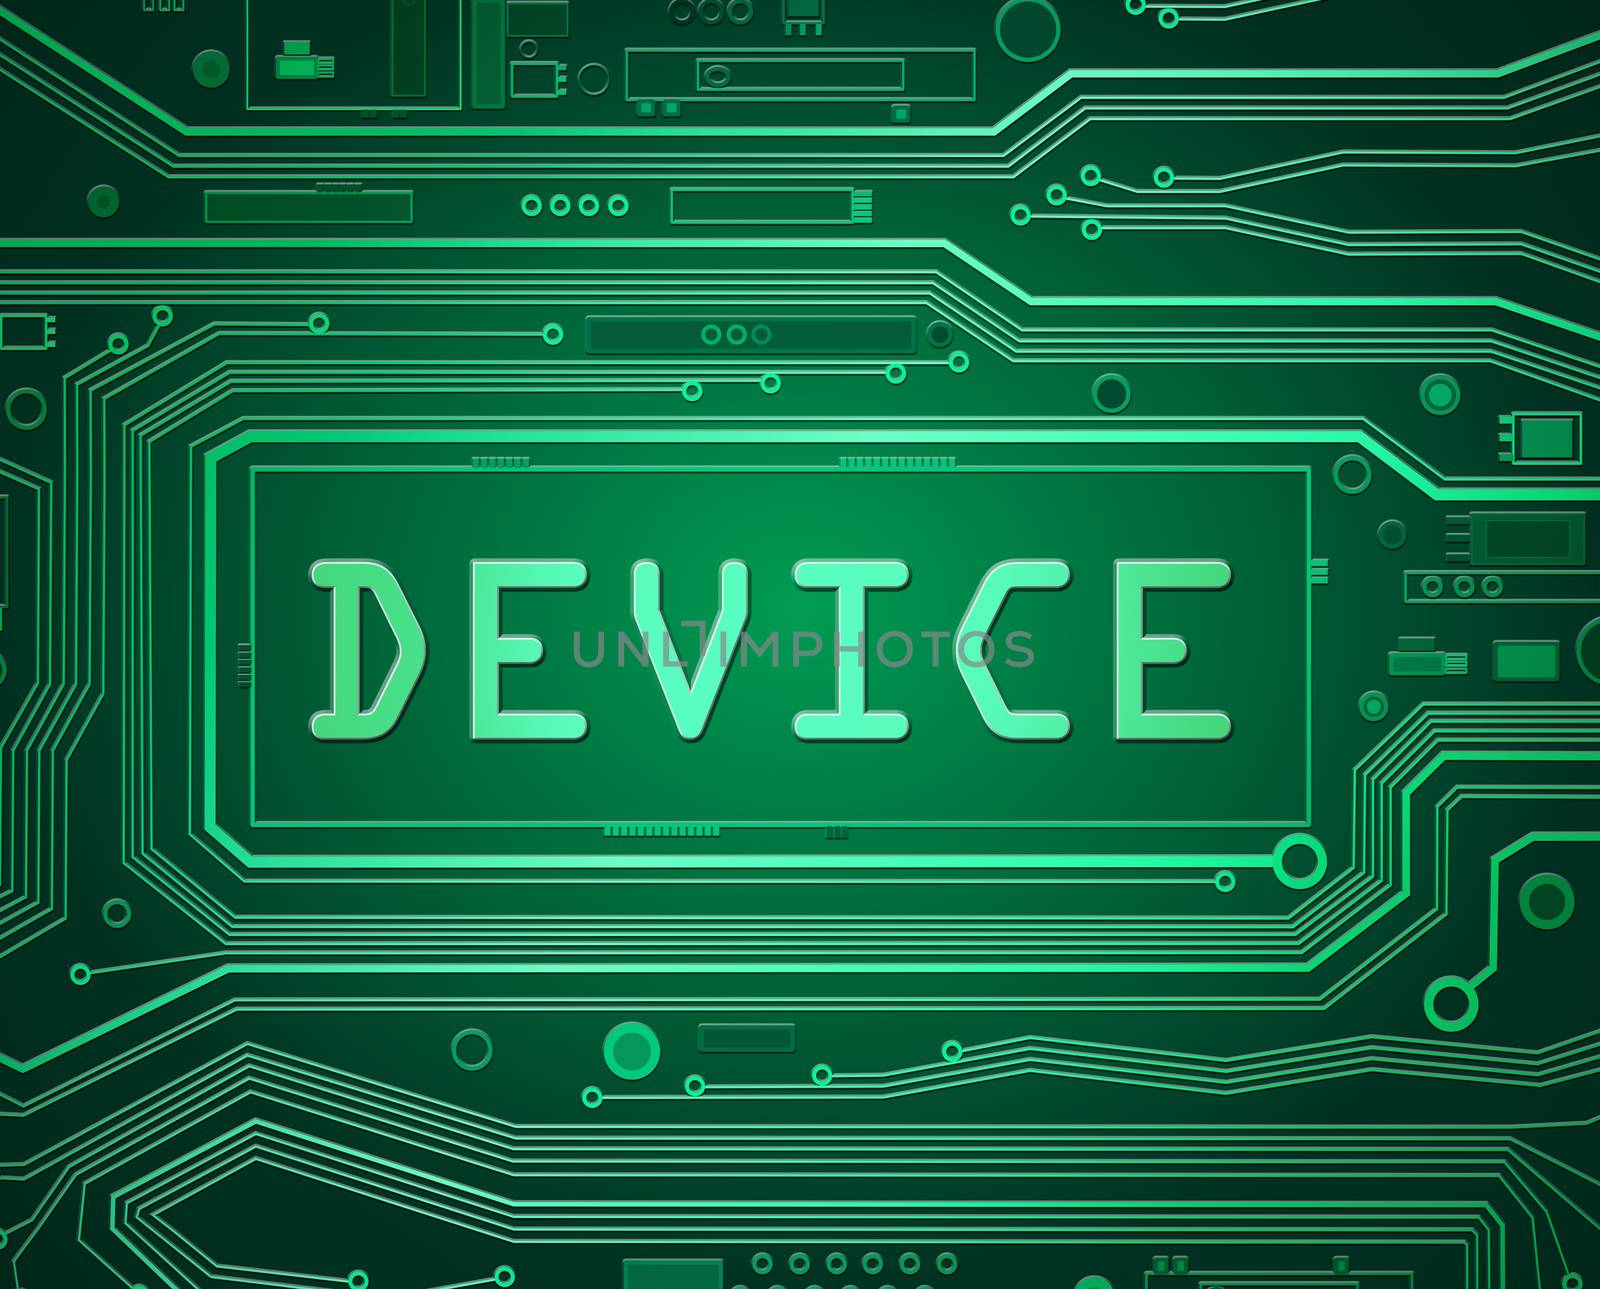 Abstract style illustration depicting printed circuit board components with a device concept.